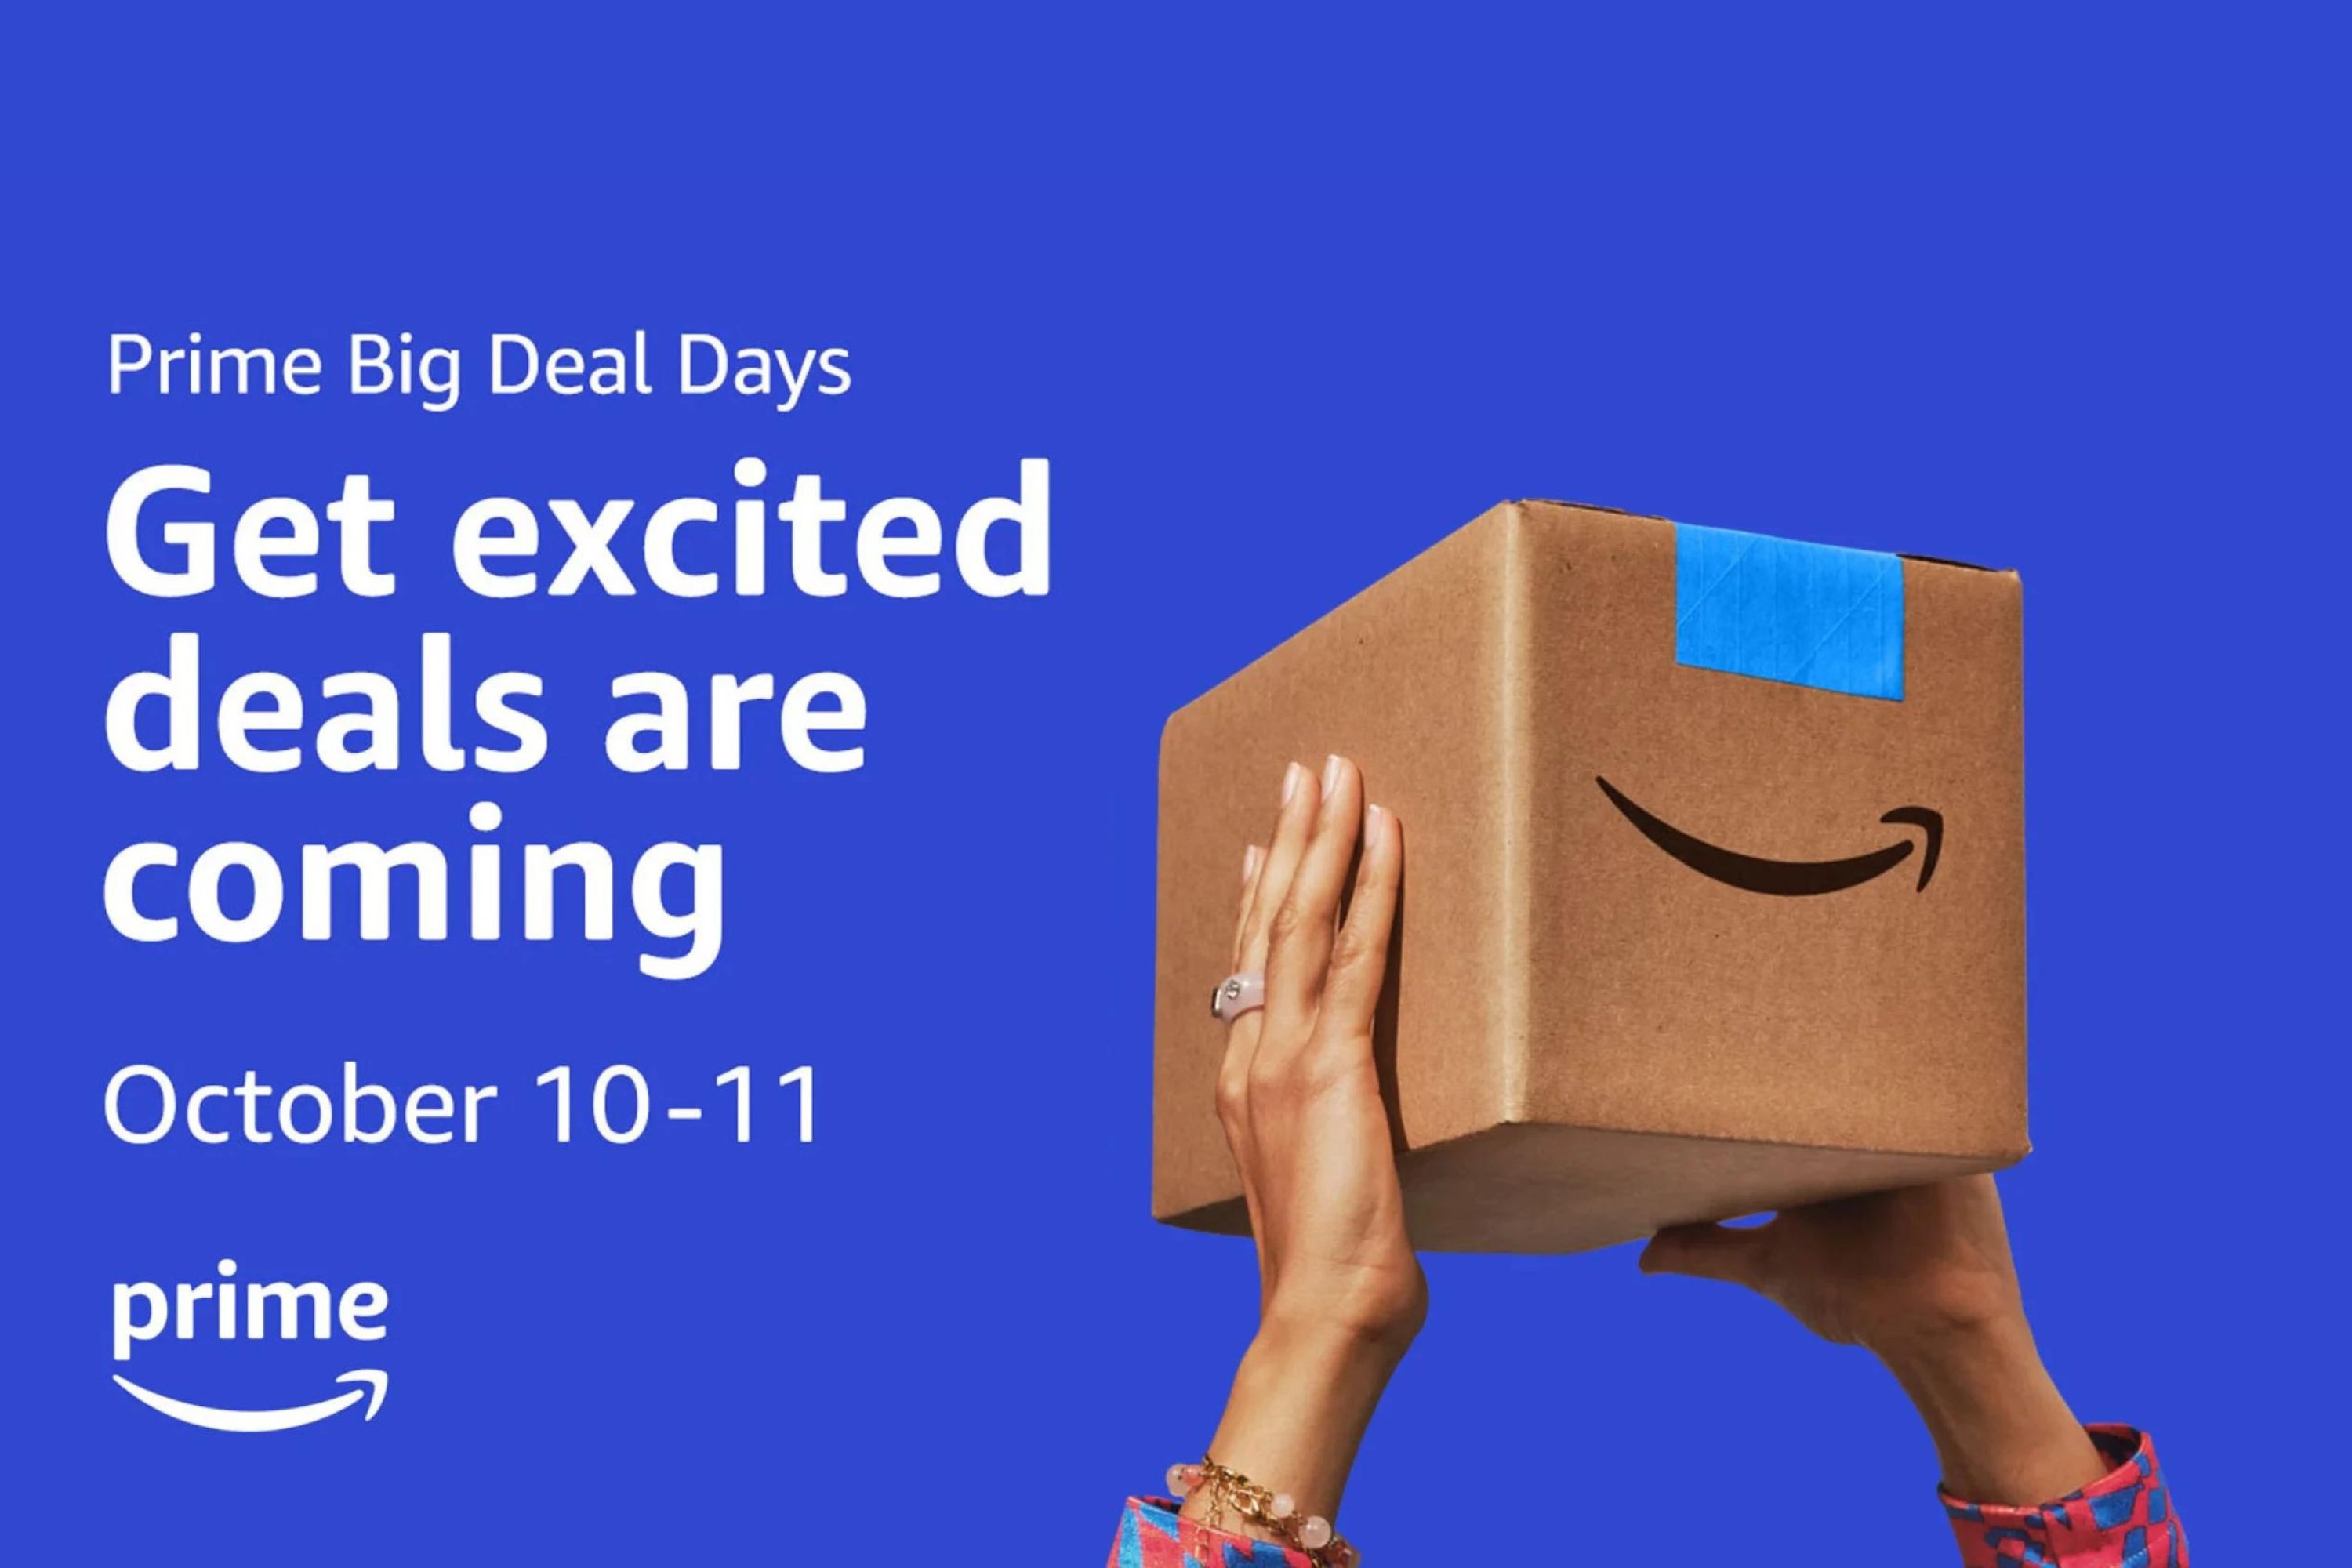 Prime Big Deal Days announcement with package in hand